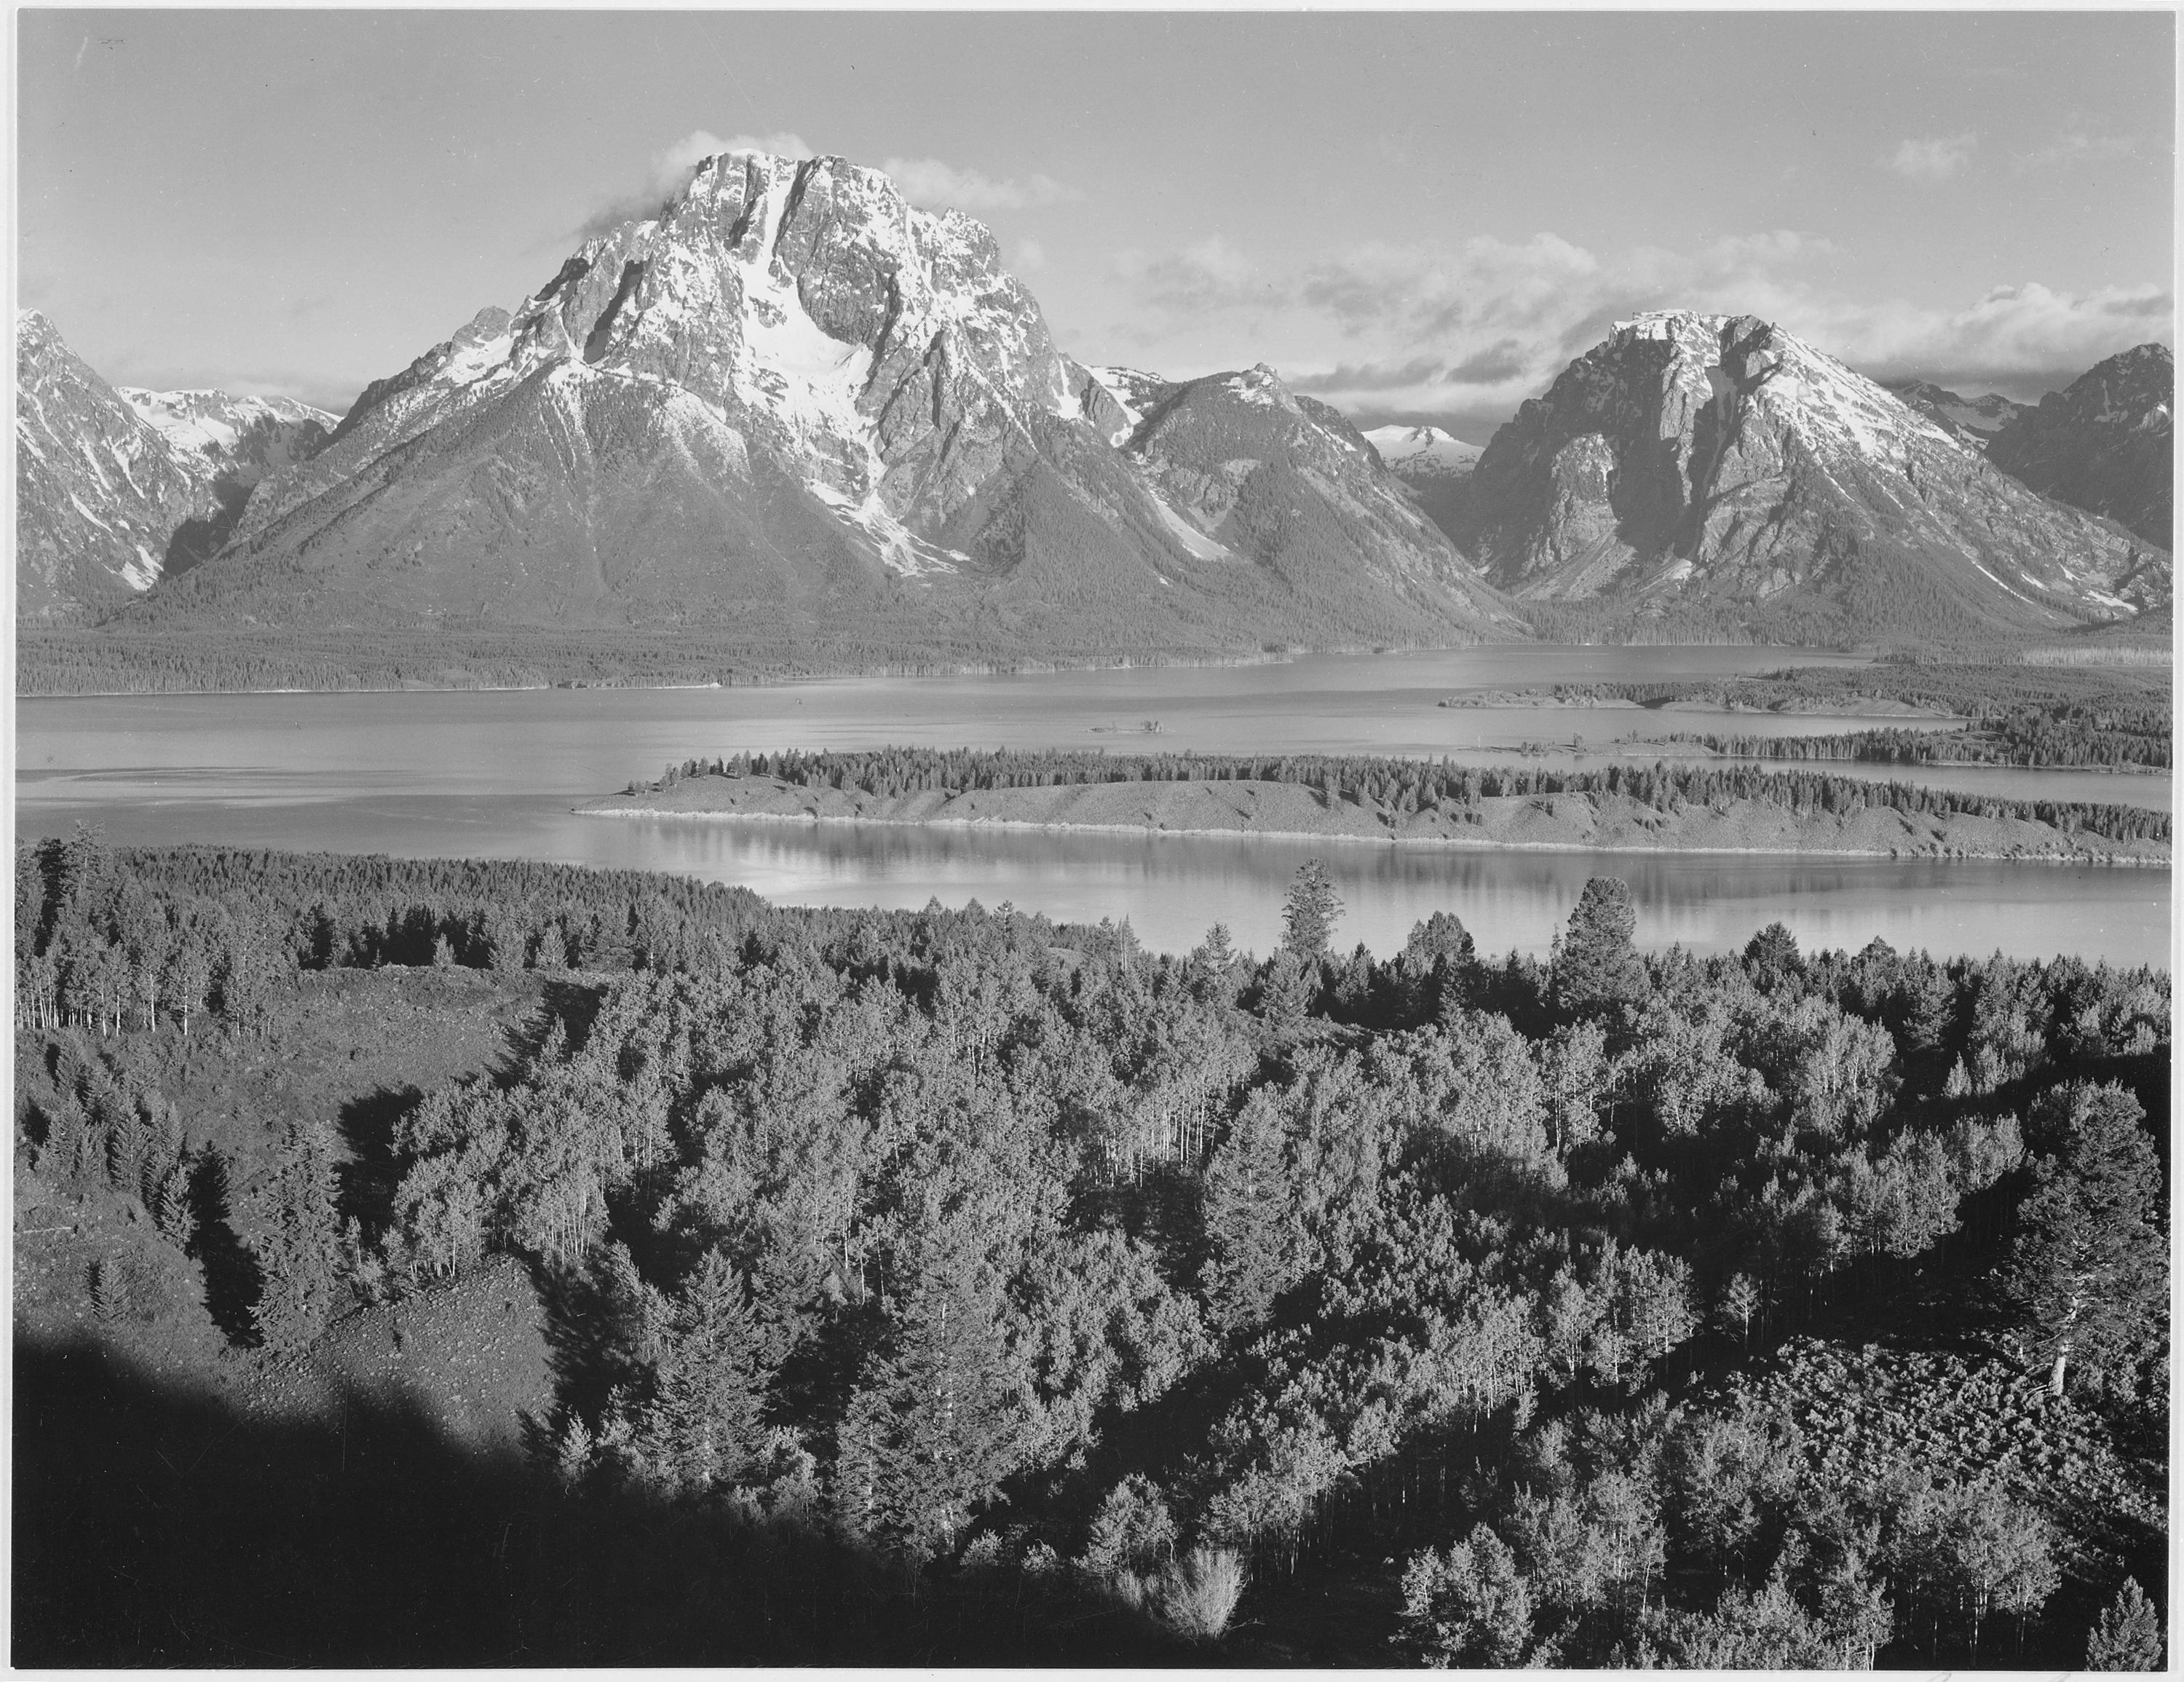 Ansel Adams - National Archives 79-AA-G05